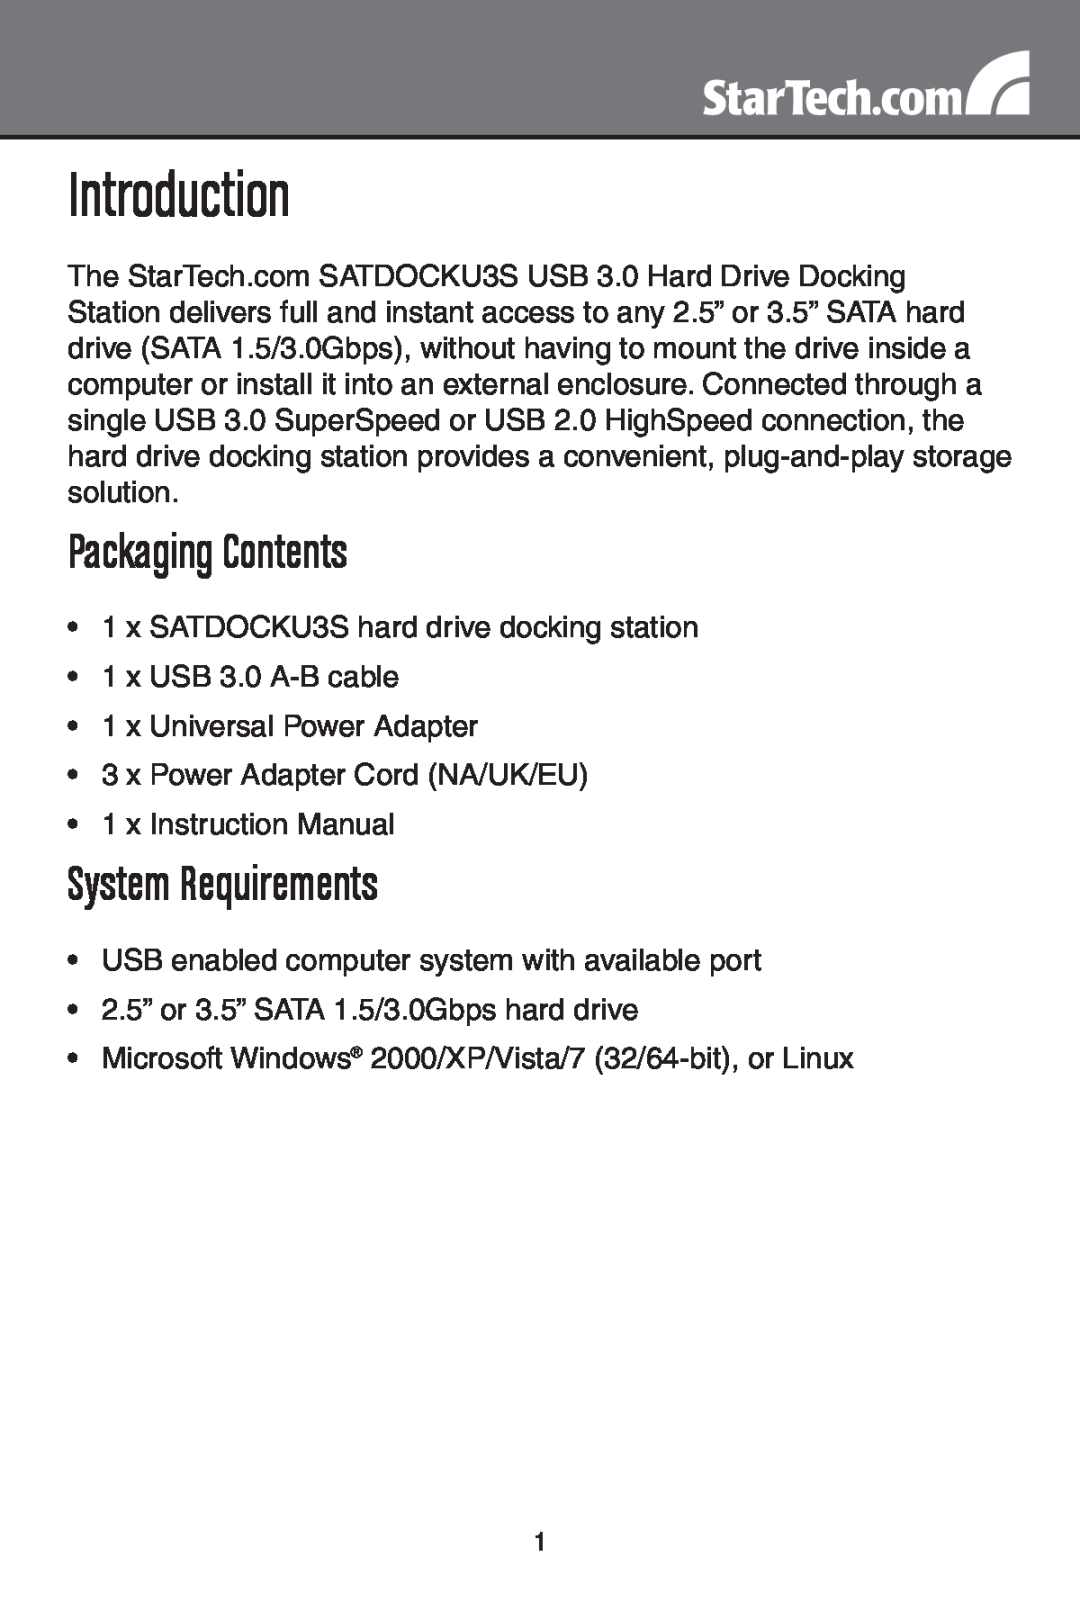 StarTech.com SATDOCKU3S instruction manual Introduction, Packaging Contents, System Requirements 